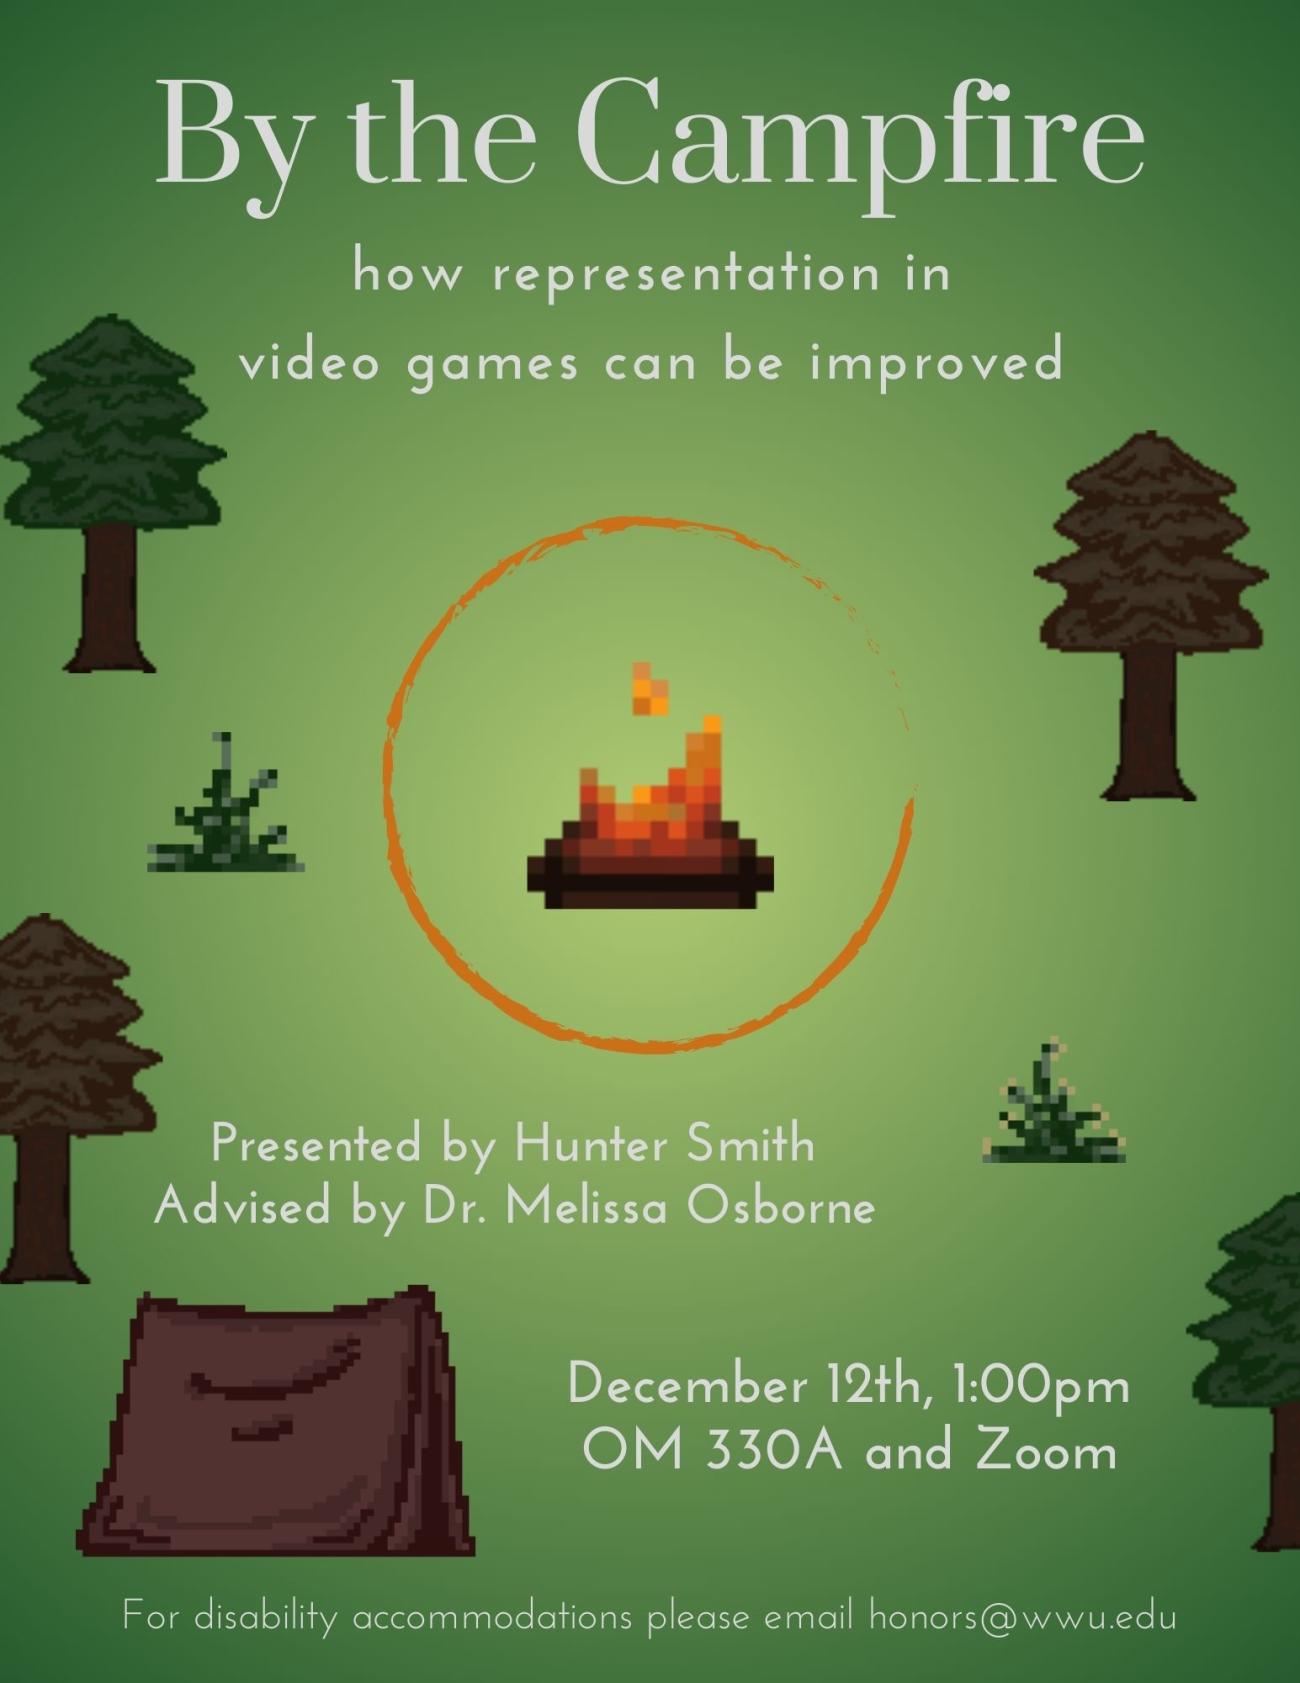 A green poster that is darker on the border and lighter towards the center. An image of a pixelated campfire is in the center with an orange circle around it. Images of pixelated trees, shrubs and a tent surround the campfire. Text reads "By the Campfire. how representation in video games can be improved. Presented by Hunter Smith. Advised by Dr. Melissa Osborne. December 12th, 1:00pm. OM 330A and Zoom. For disability accommodations please email honors@wwu.edu”